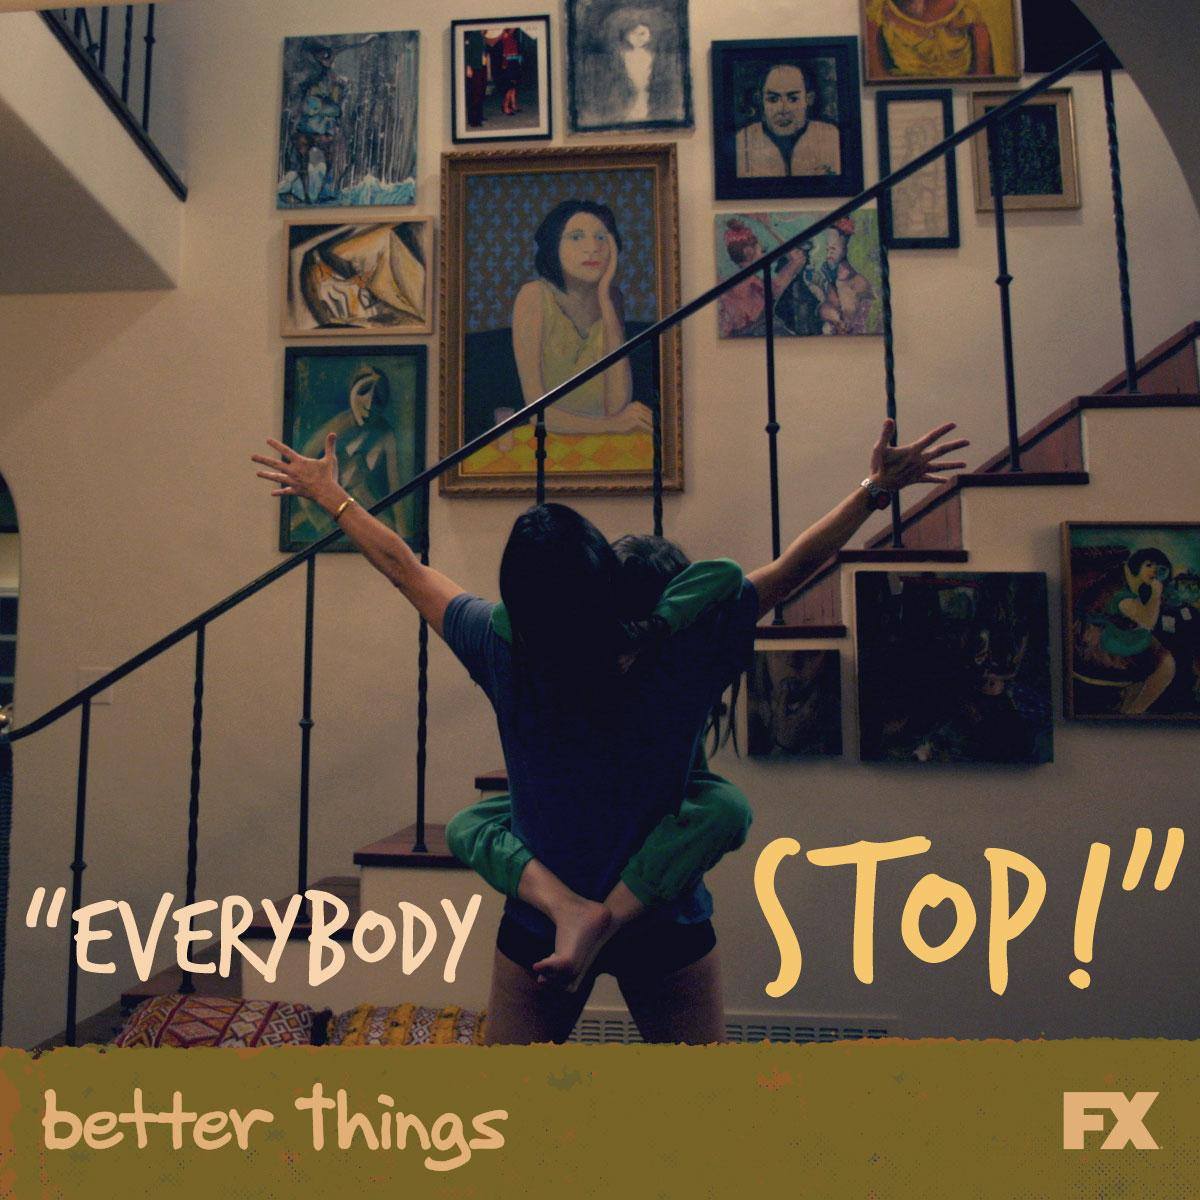 Check This Out #3: “Better Things”